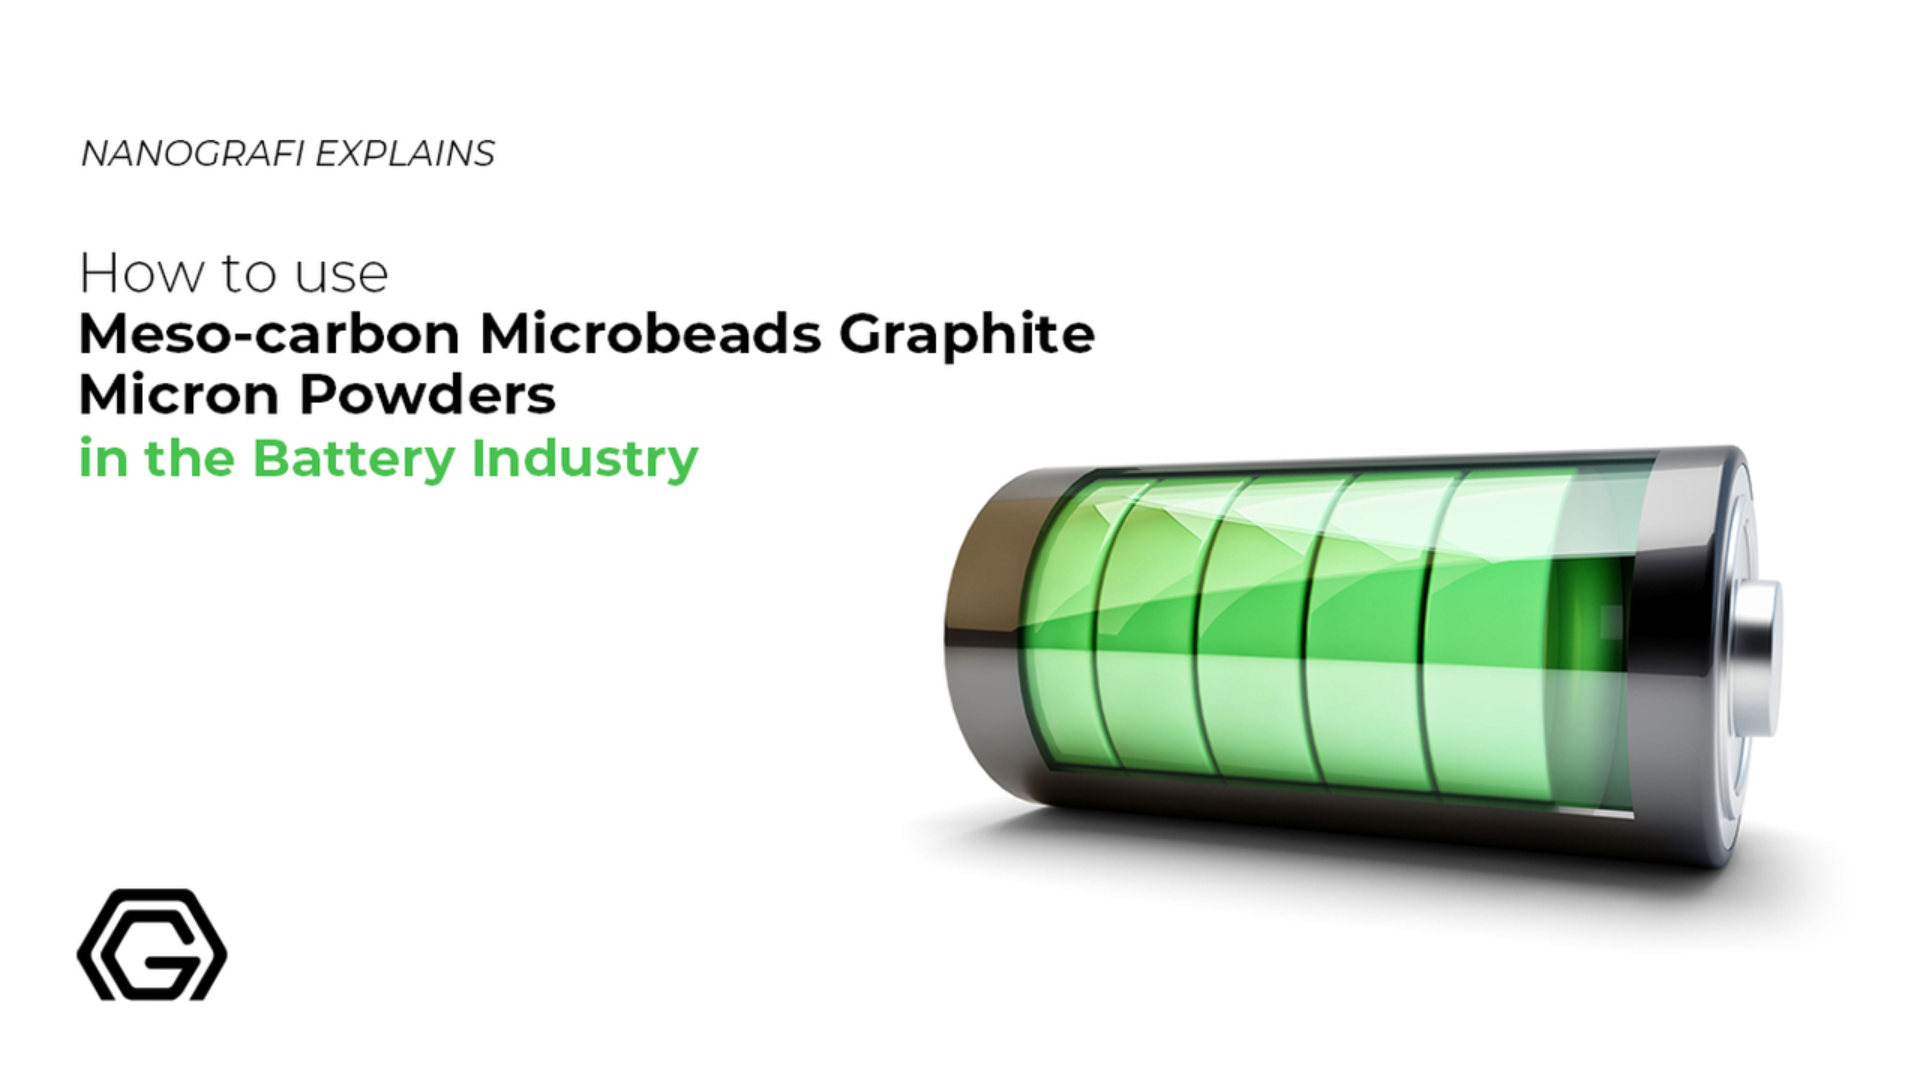 Meso-carbon microbeads graphite micronpowders in the battery industry